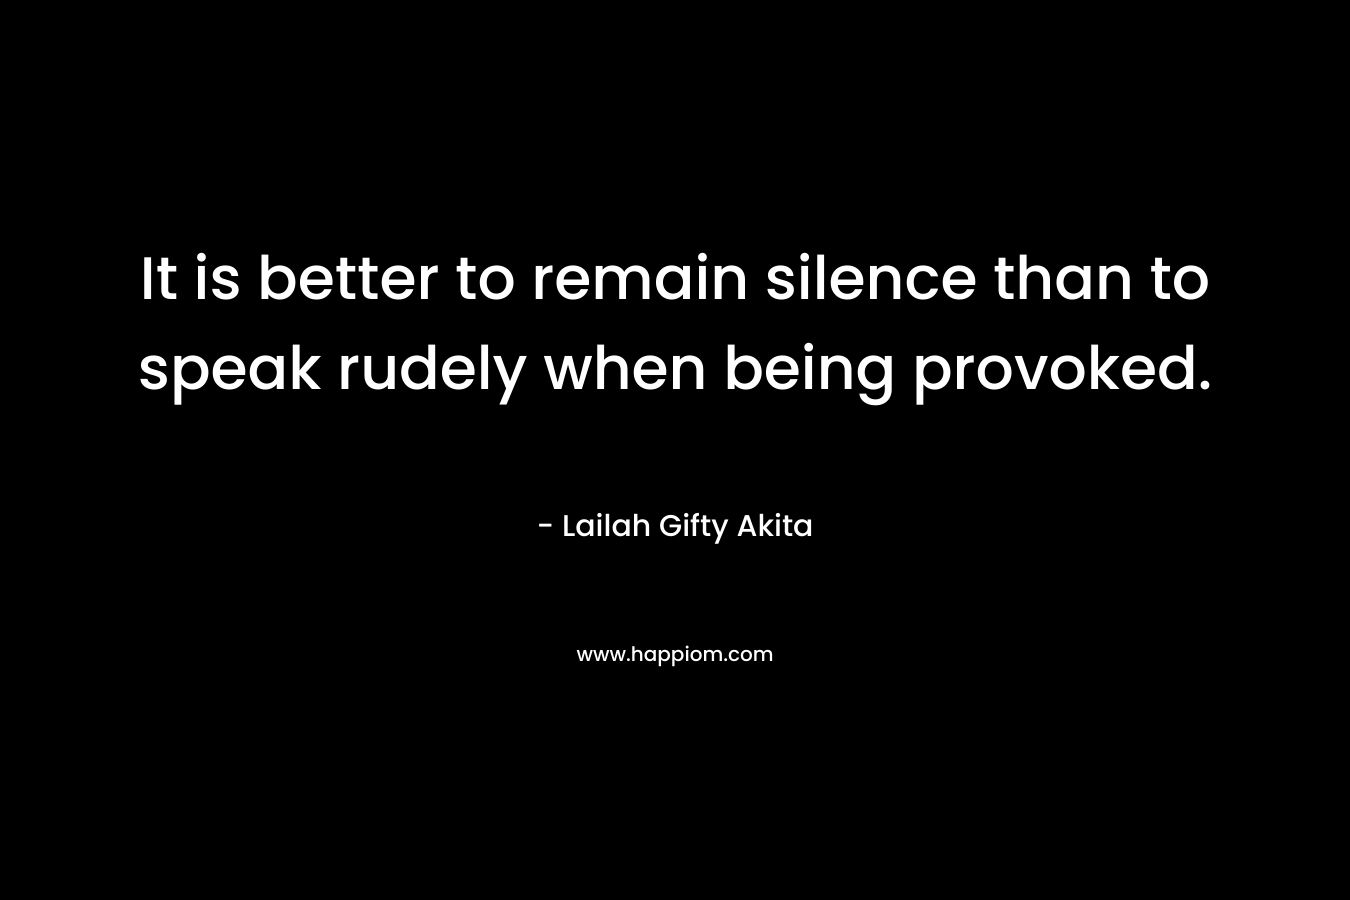 It is better to remain silence than to speak rudely when being provoked. – Lailah Gifty Akita